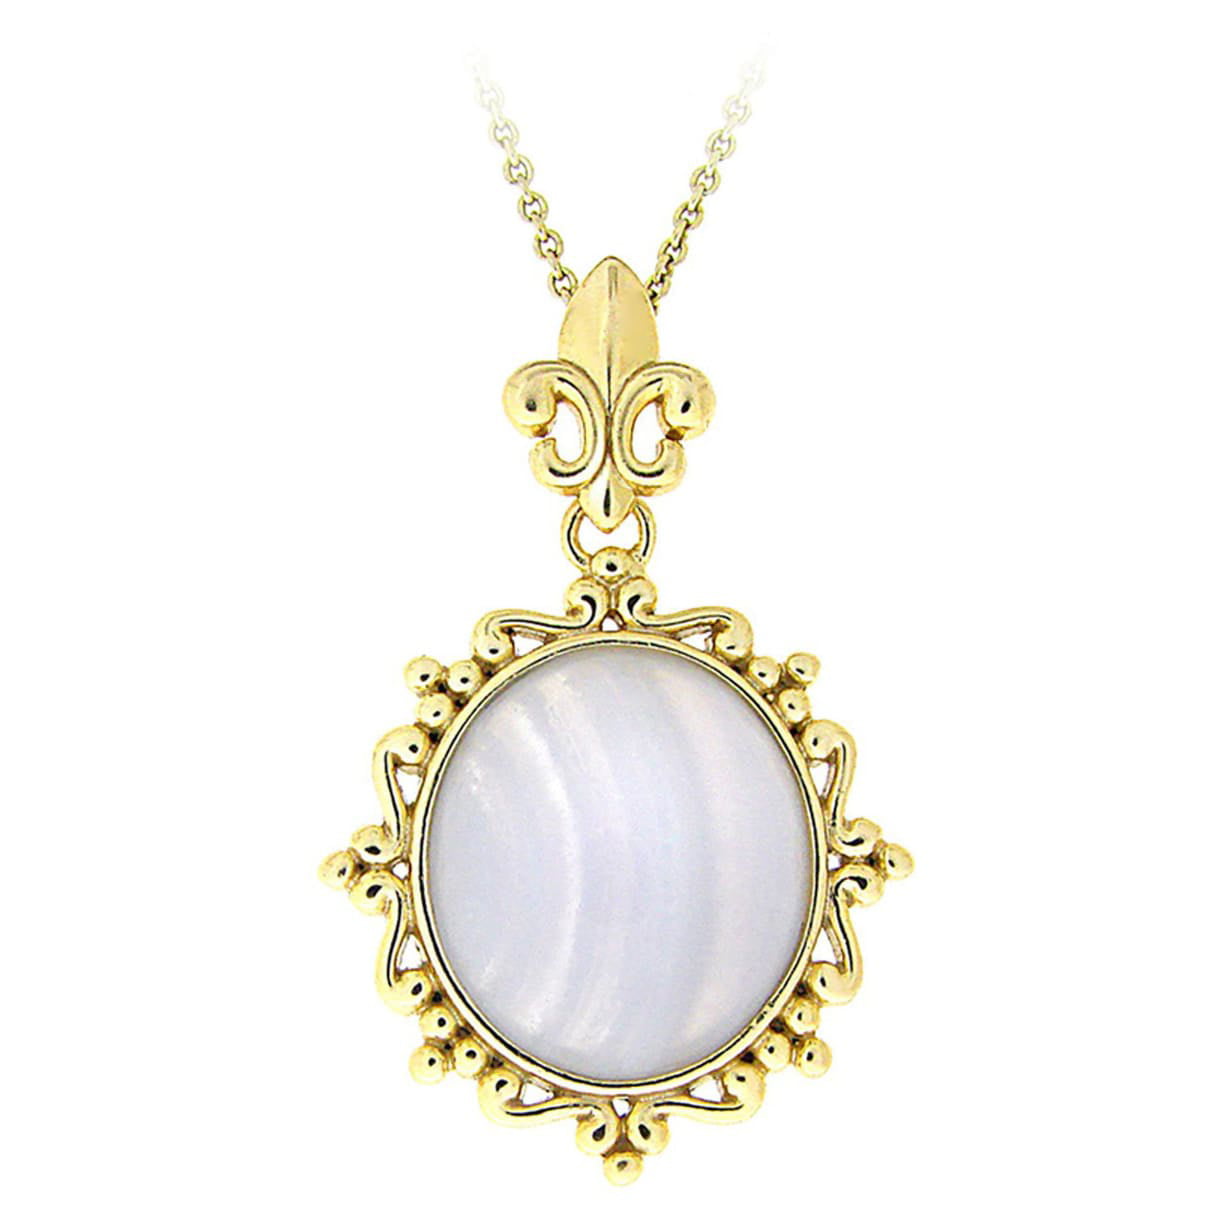 Agate pendant neckless with gold color bail and sides and a lace strap with gold color clasp.